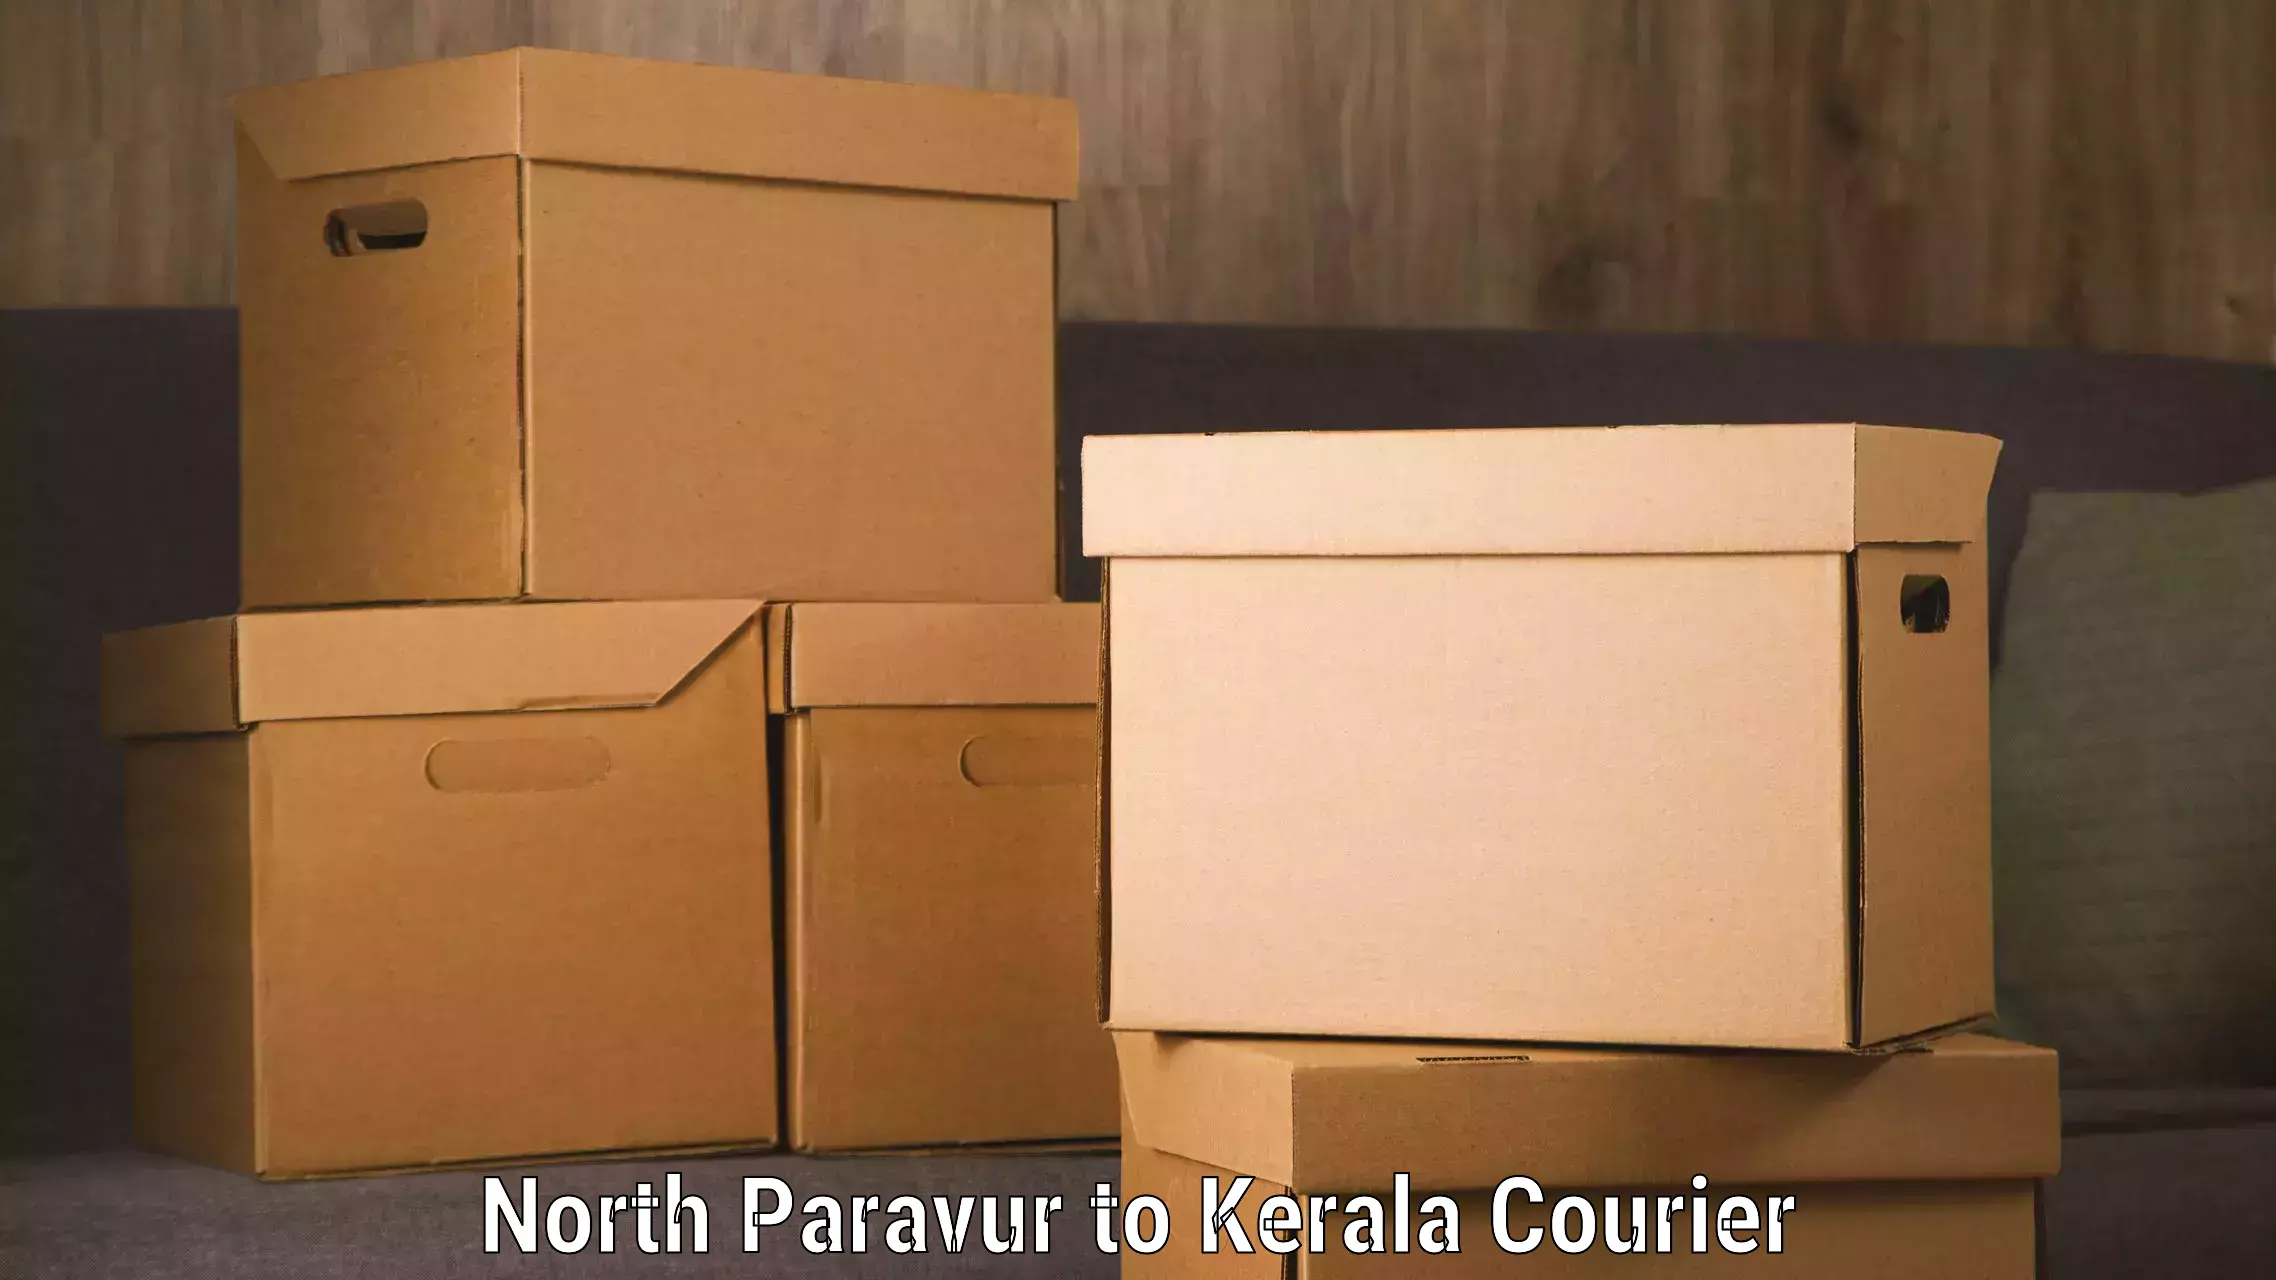 Global shipping networks in North Paravur to North Paravur